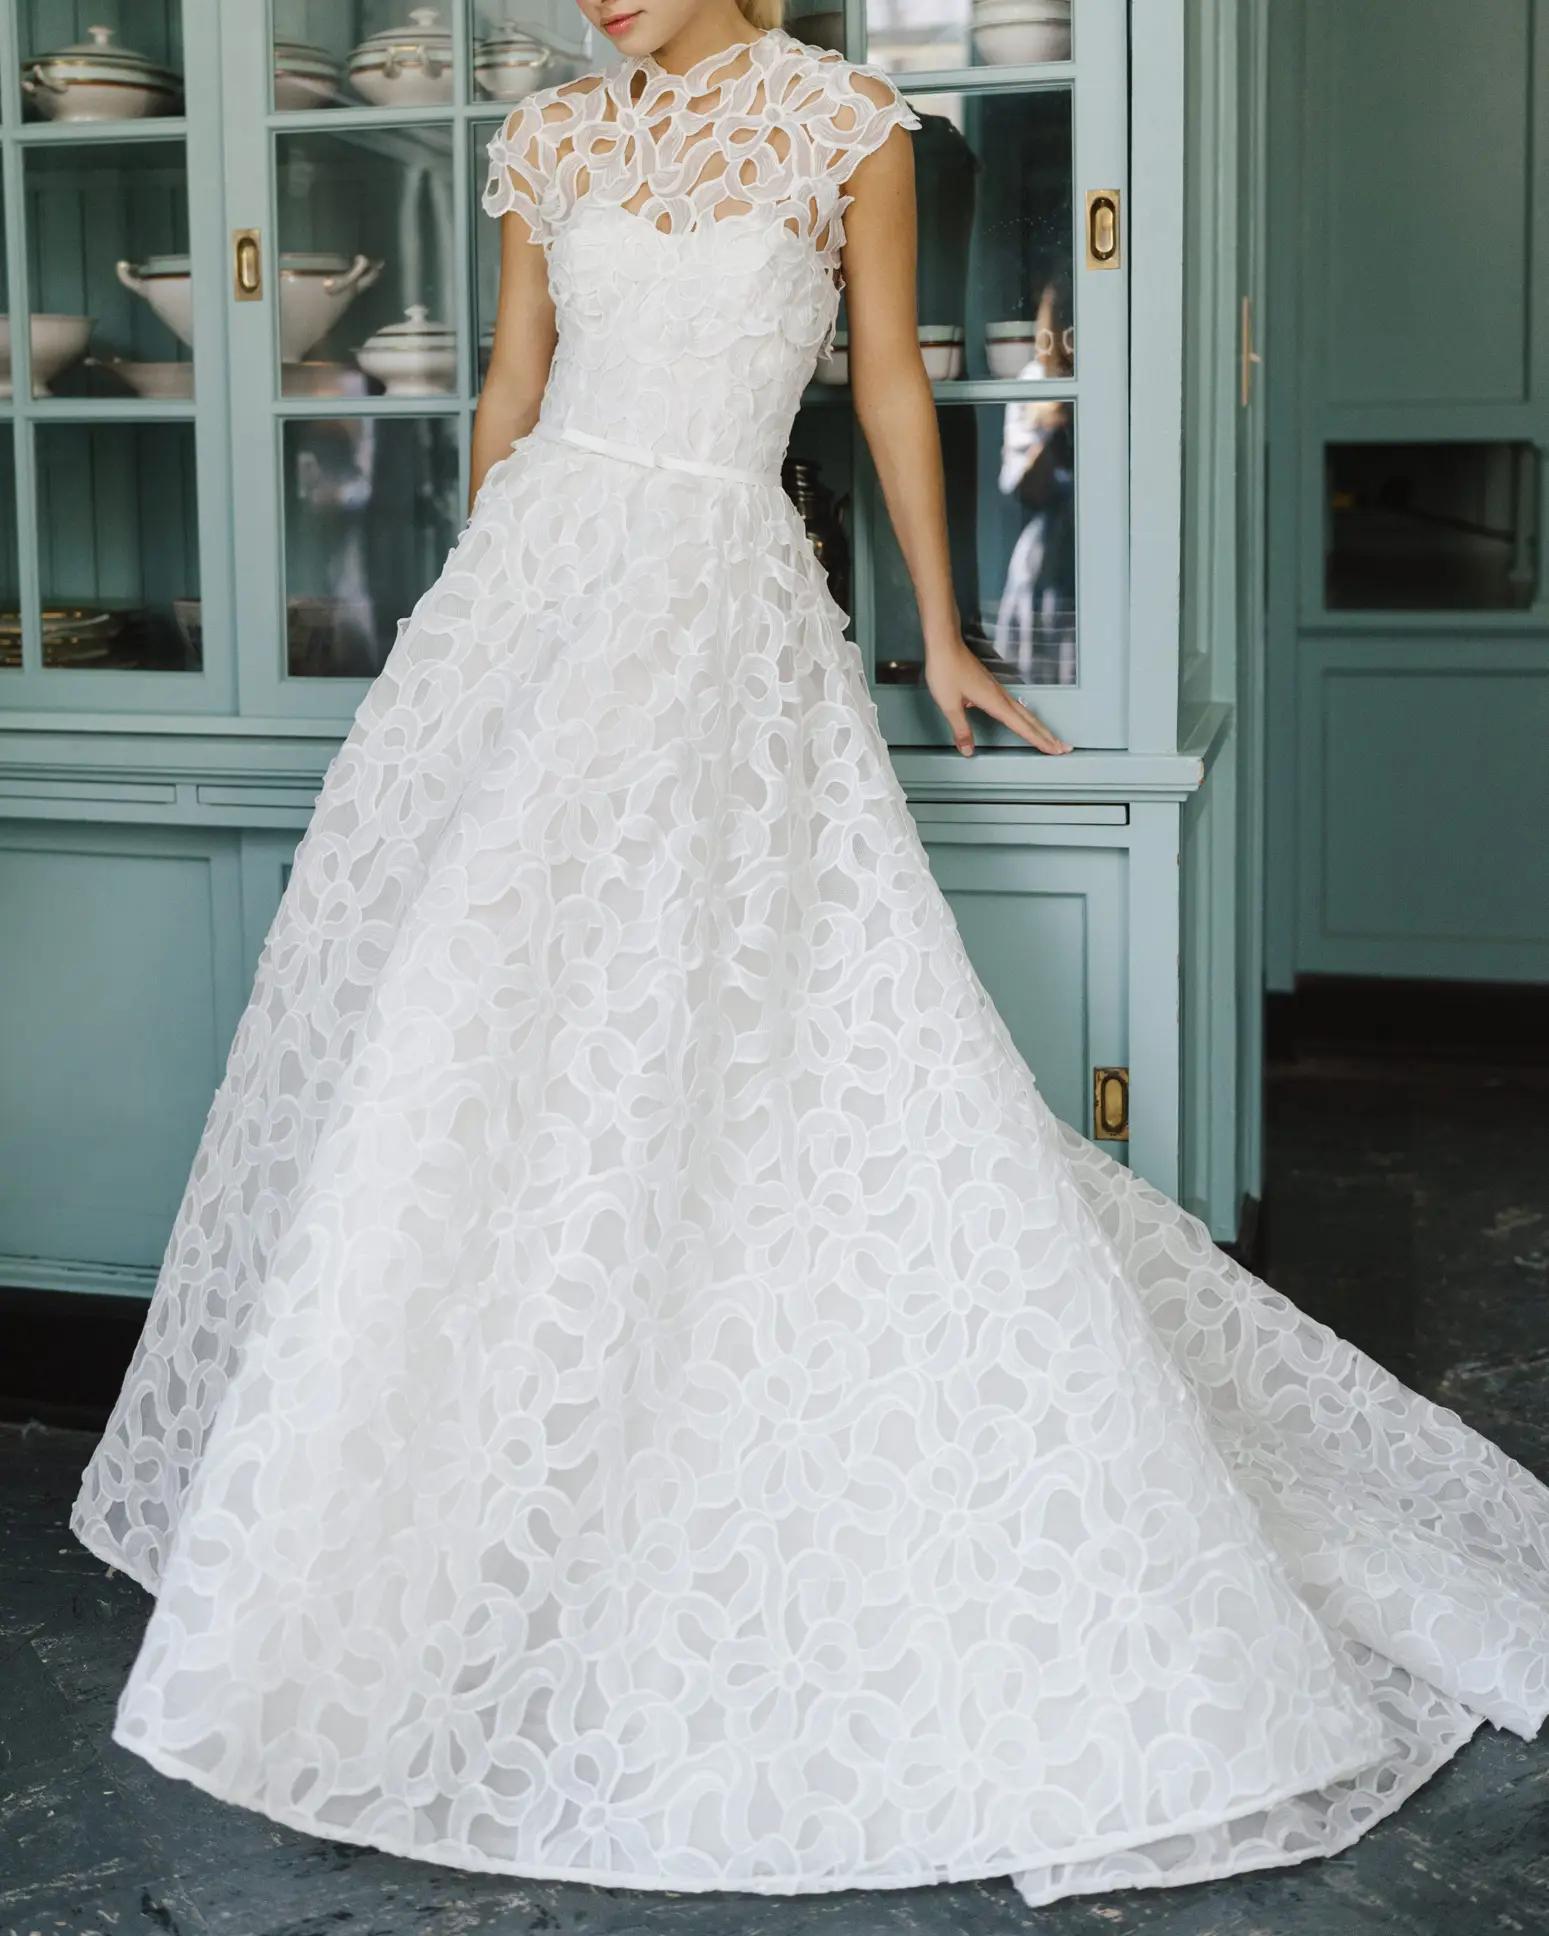 Irby ballgown wedding dress with laser cut bow detail and topper option by Anne Barge in Columbus Ohio